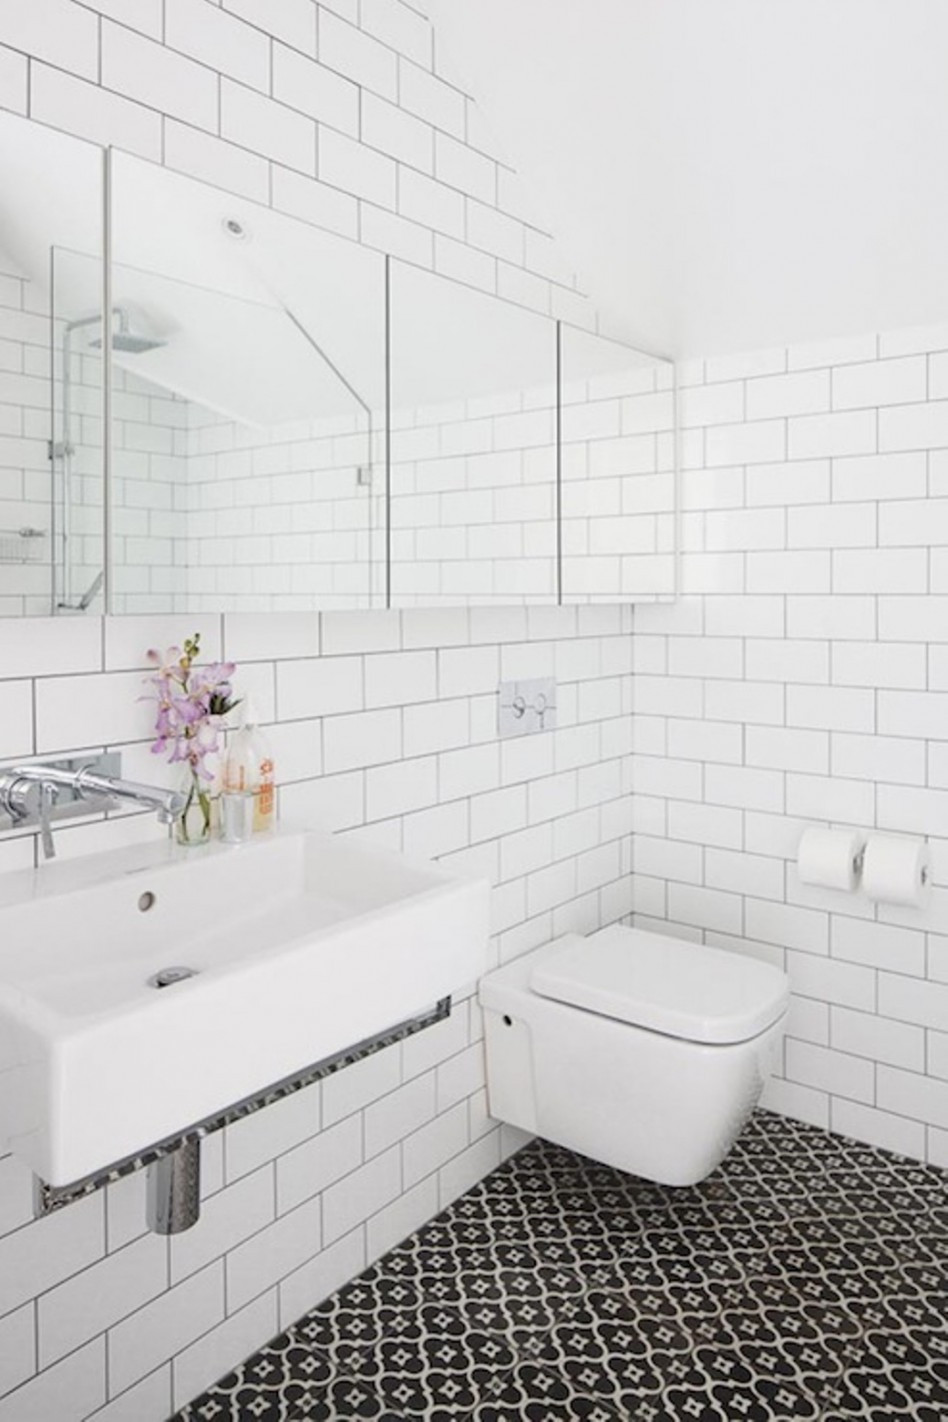 Tile Sizes For Bathrooms
 Subway Tile Sizes for Wet Areas – HomesFeed